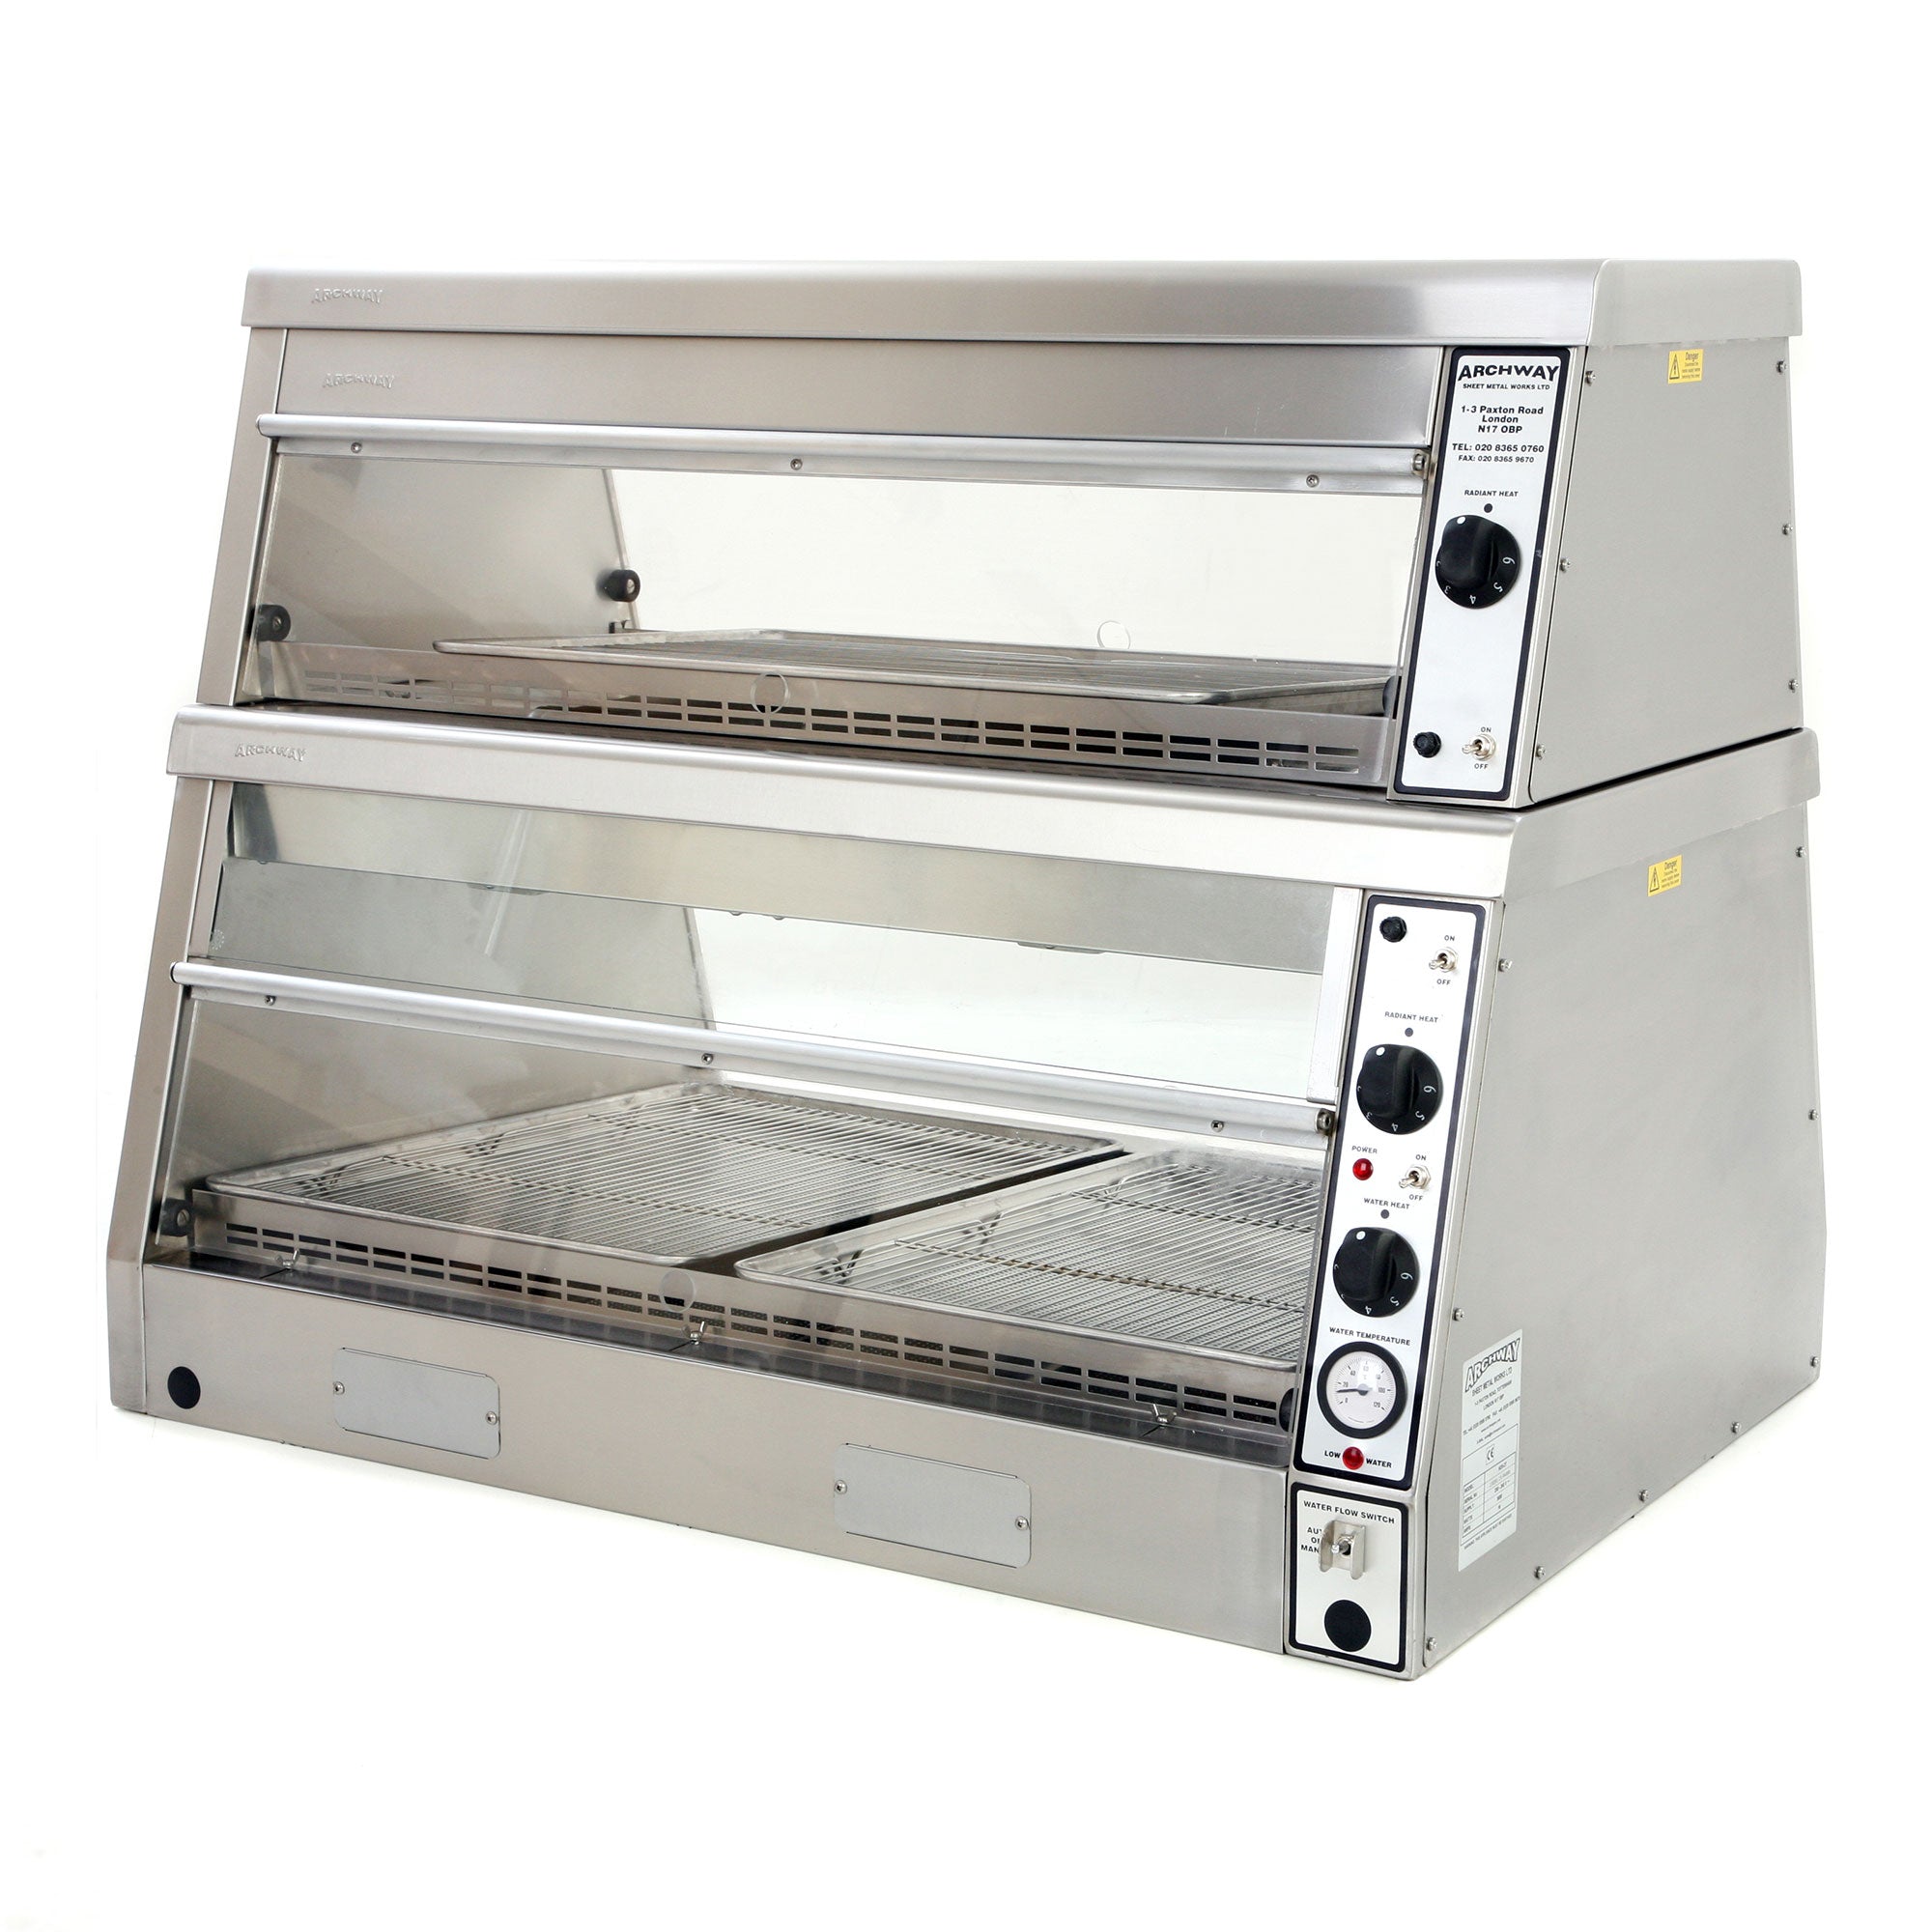 Heated Chicken Display – 3 Pans / 2 Tier.Product ref:00451.MODEL:HD3/2T.🚚 4-6 weeks Delivery